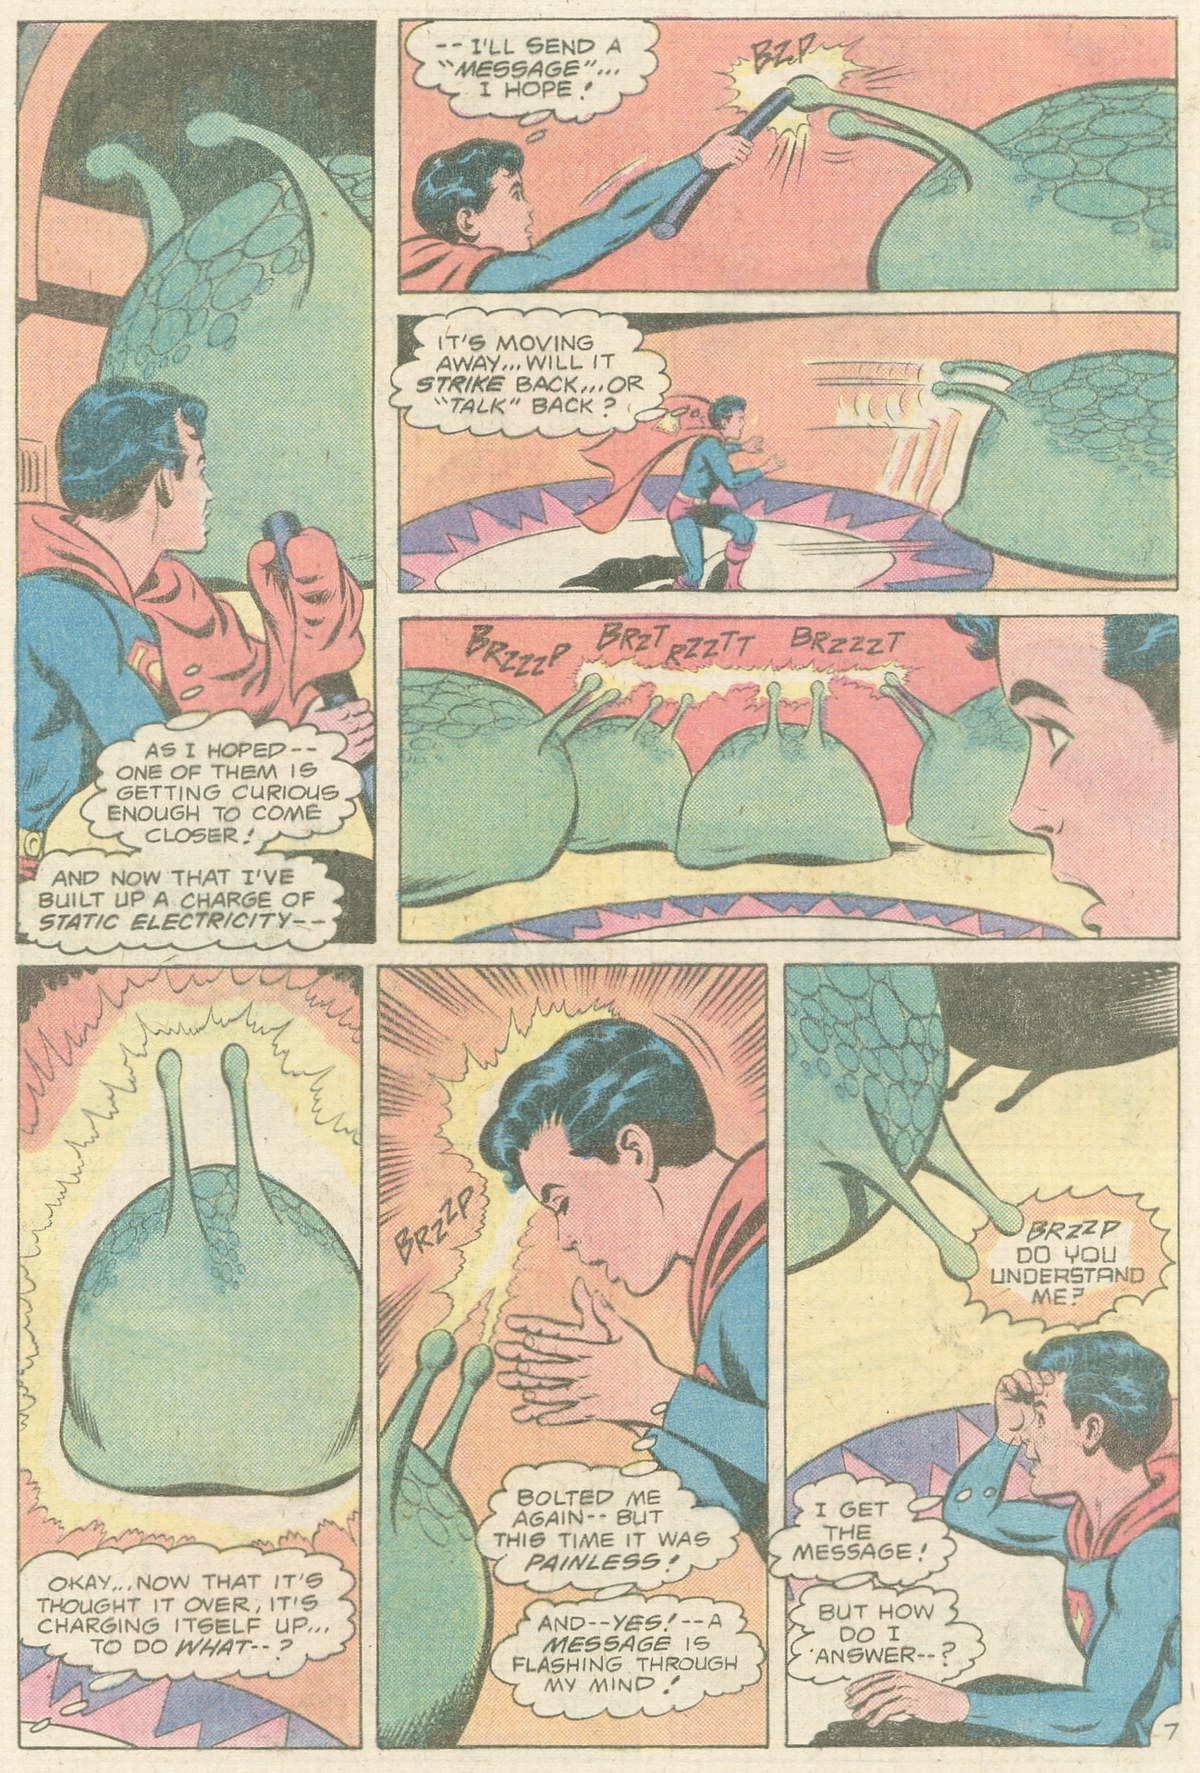 The New Adventures of Superboy 20 Page 24